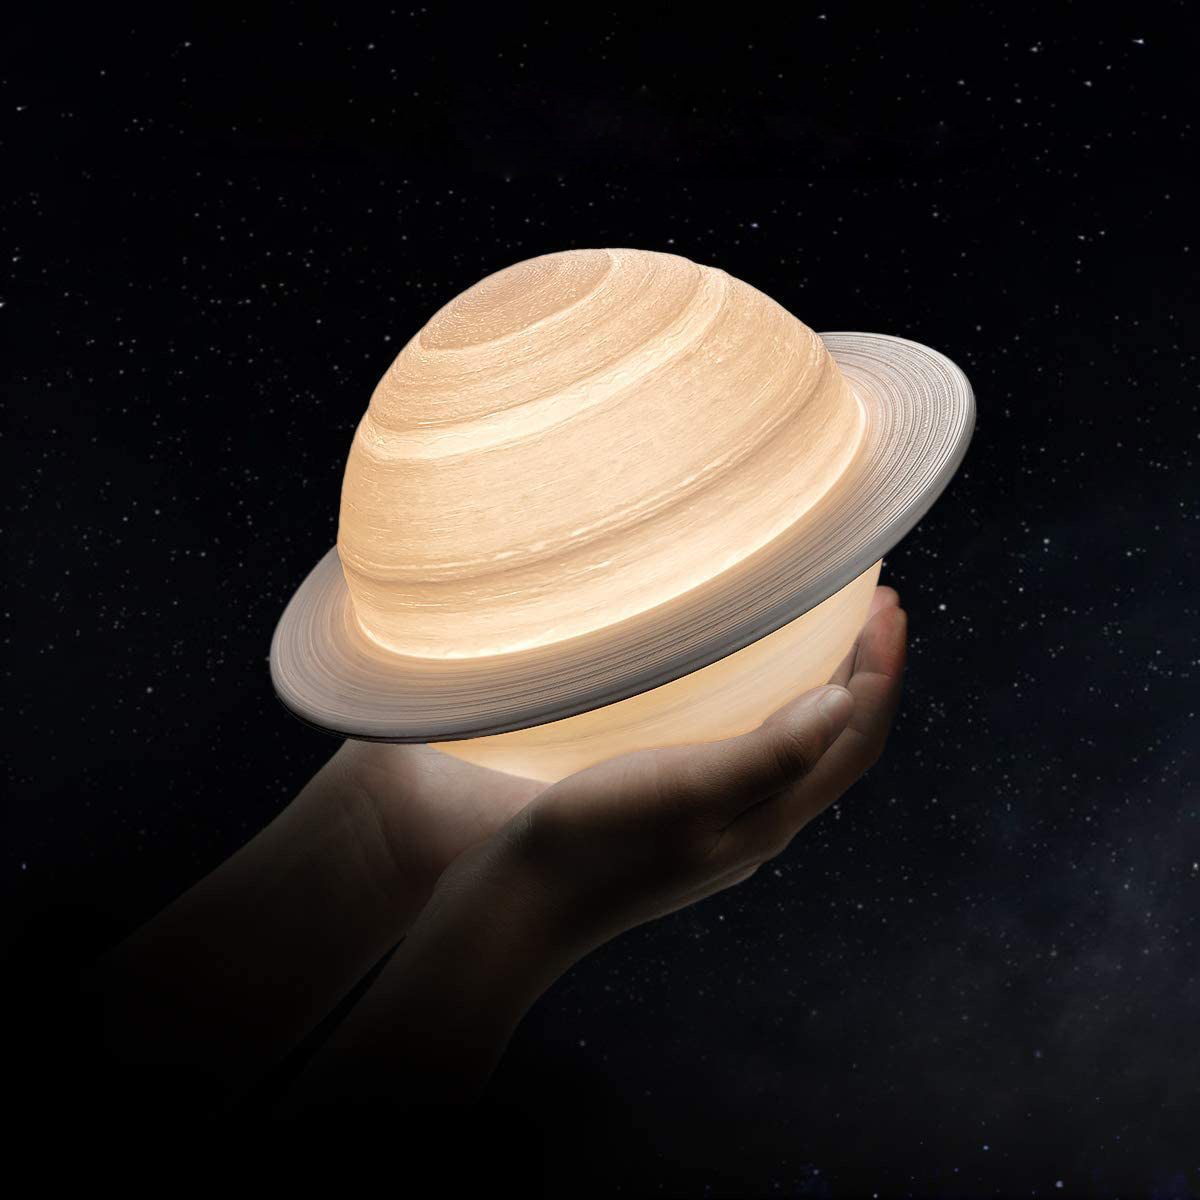 http://www.home-designing.com/product-of-the-week-a-saturn-shaped-led-lamp